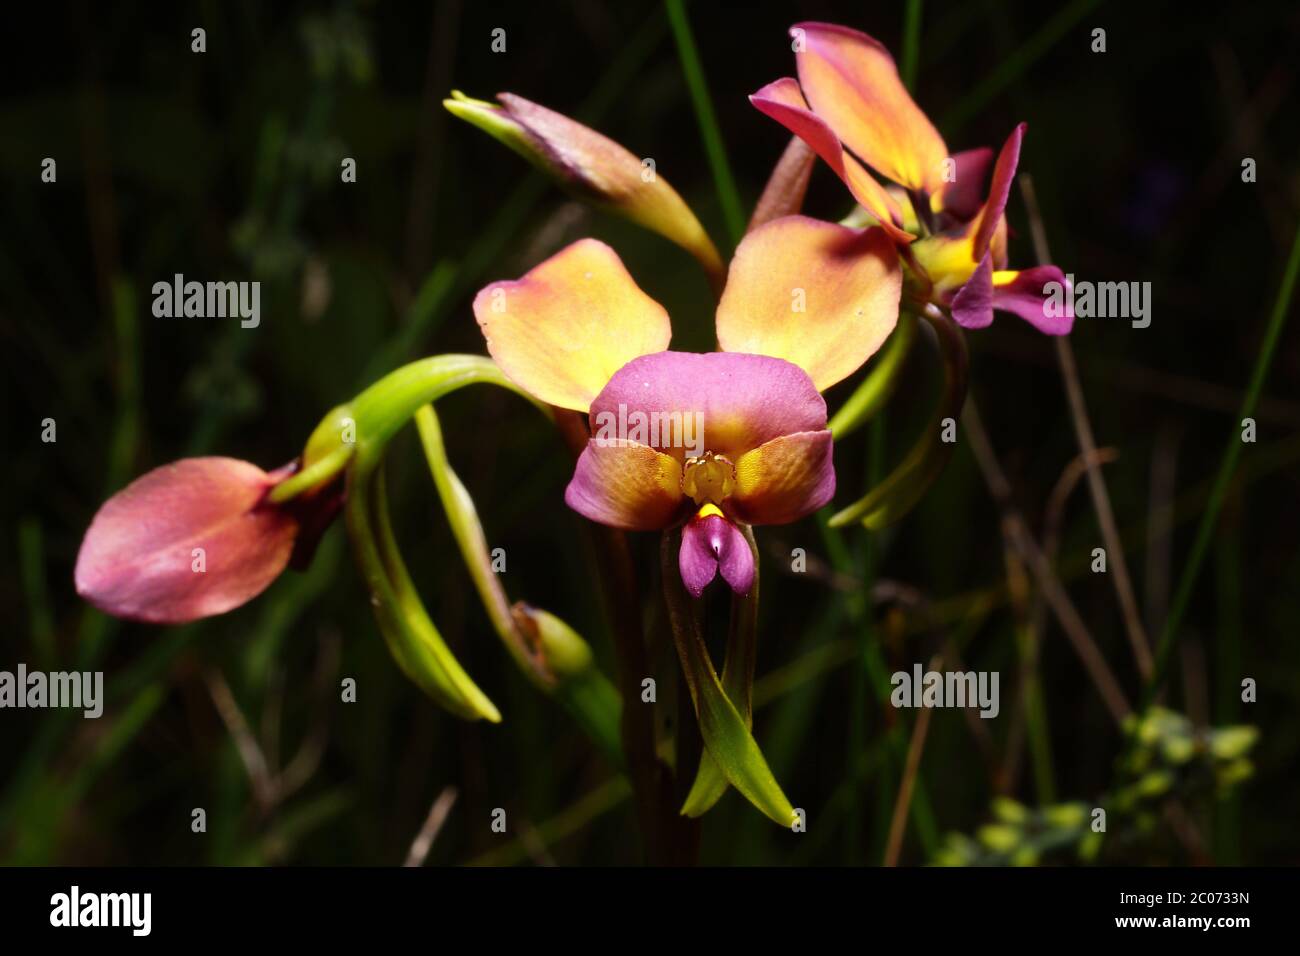 Flowers of Diuris longifolia, the purple Pansy Orchid, frontal view, natural background Stock Photo